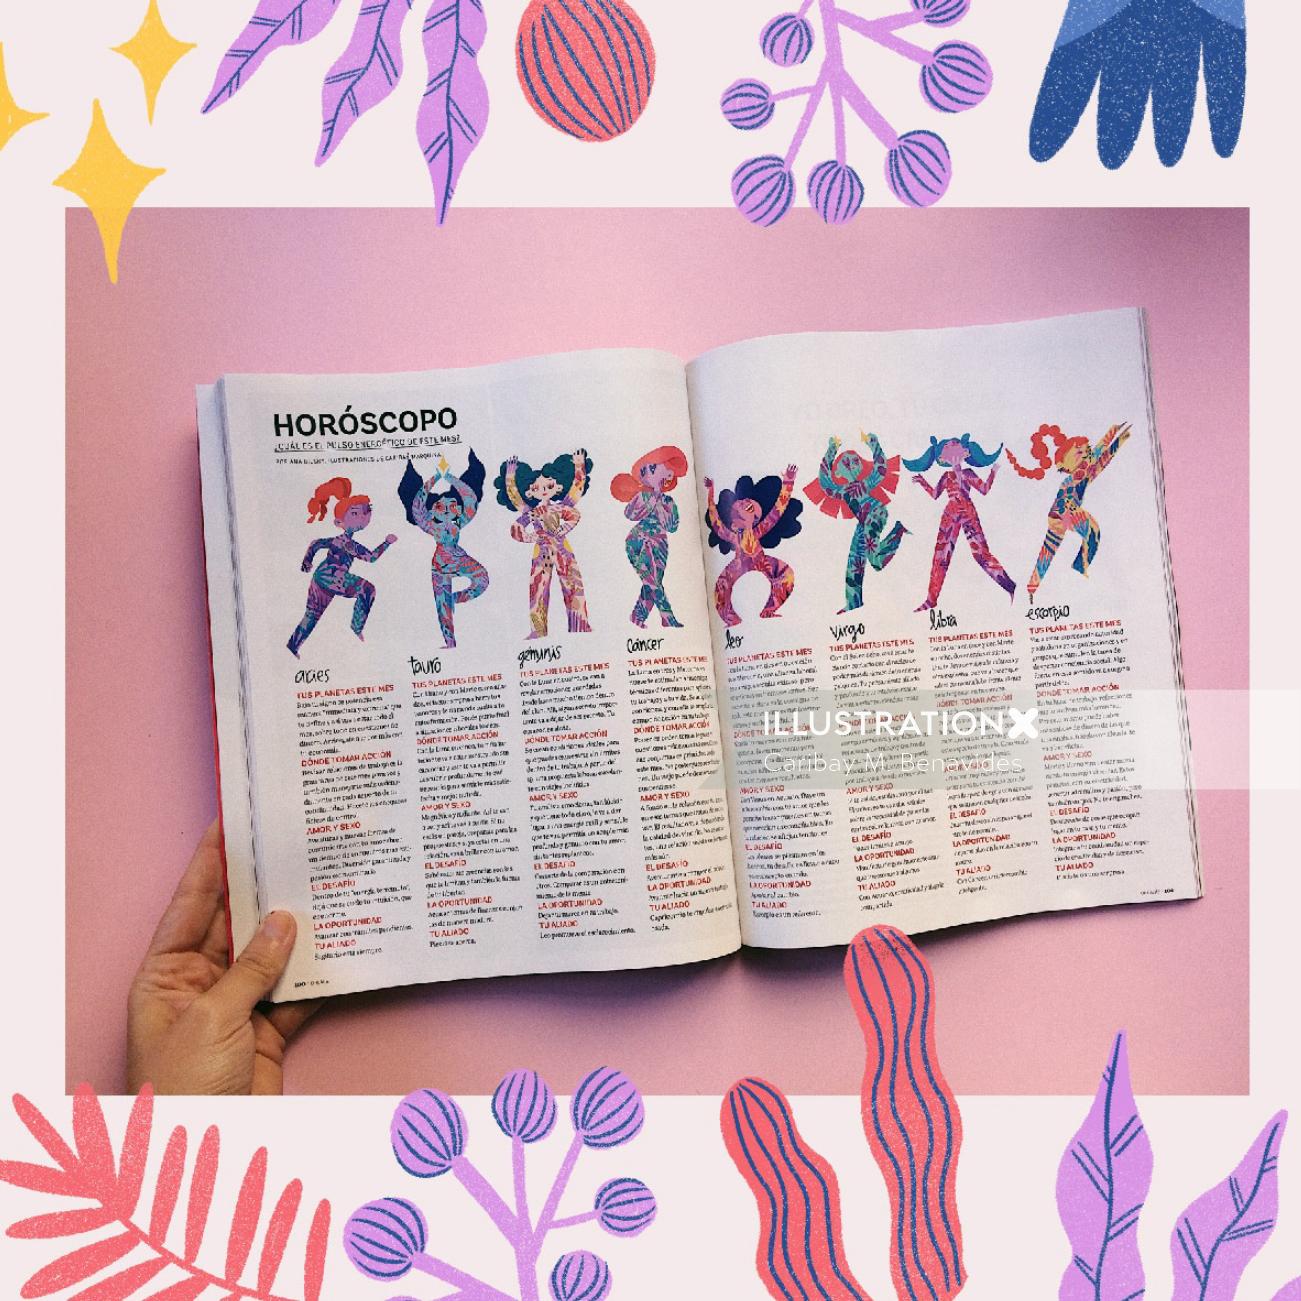 Illustrations for the April horoscope of Oh Lala magazine